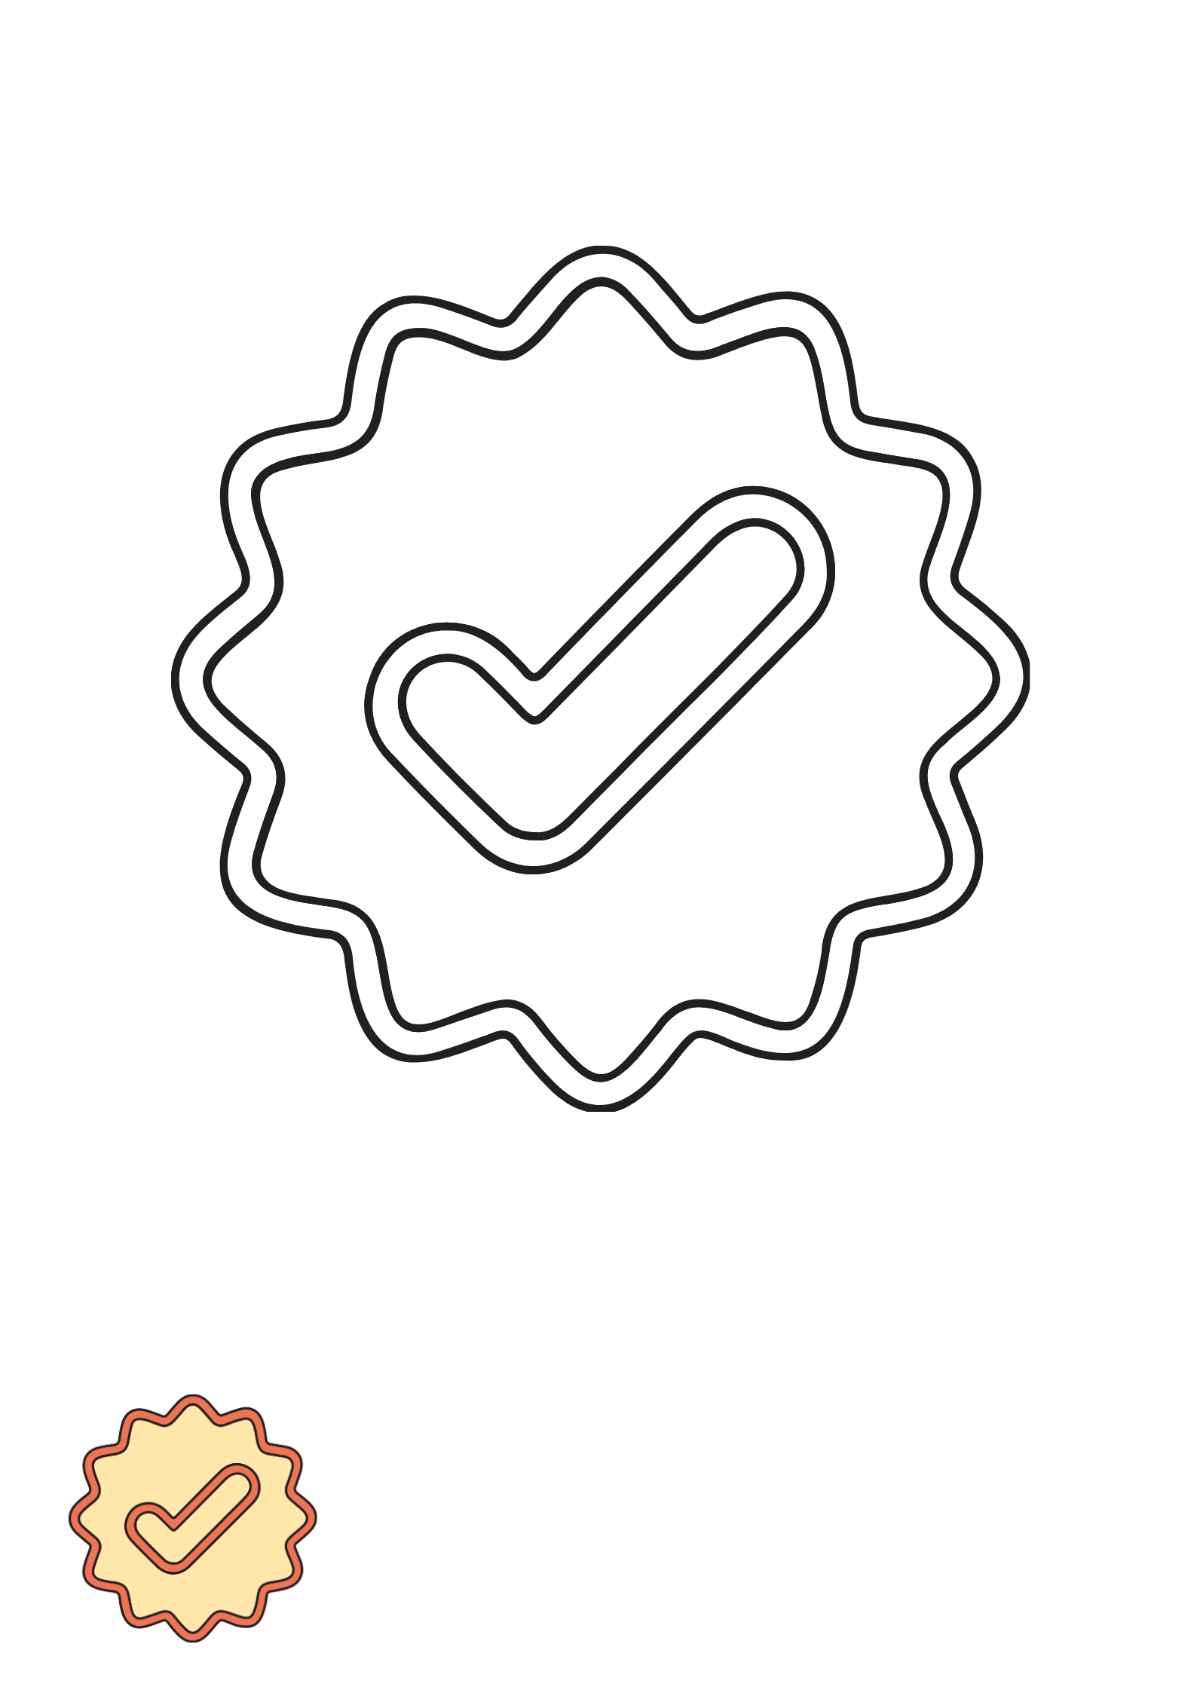 Free Check Mark Shape coloring page Template